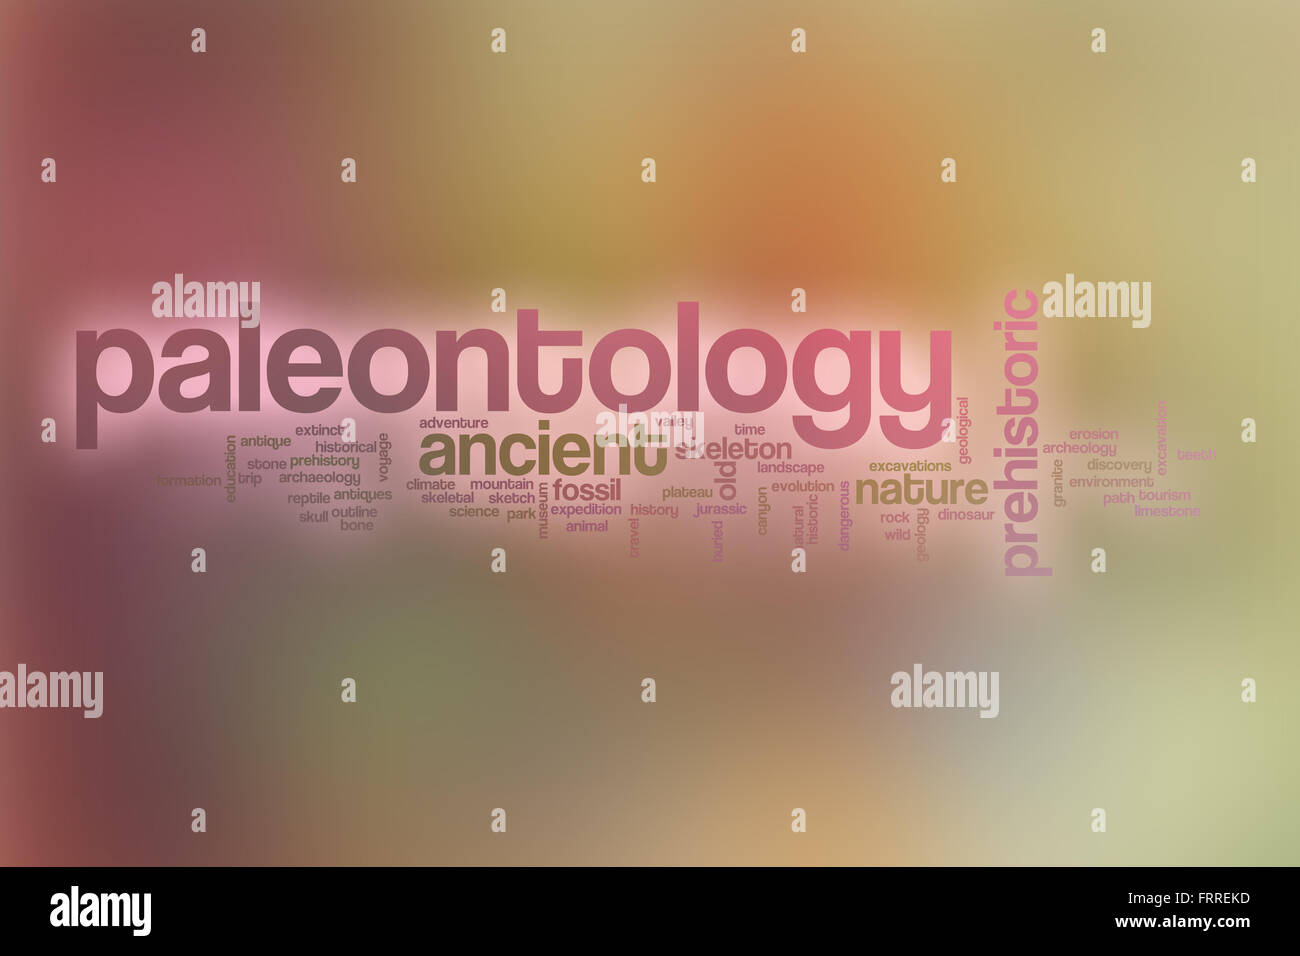 Paleontology word cloud concept with abstract background Stock Photo